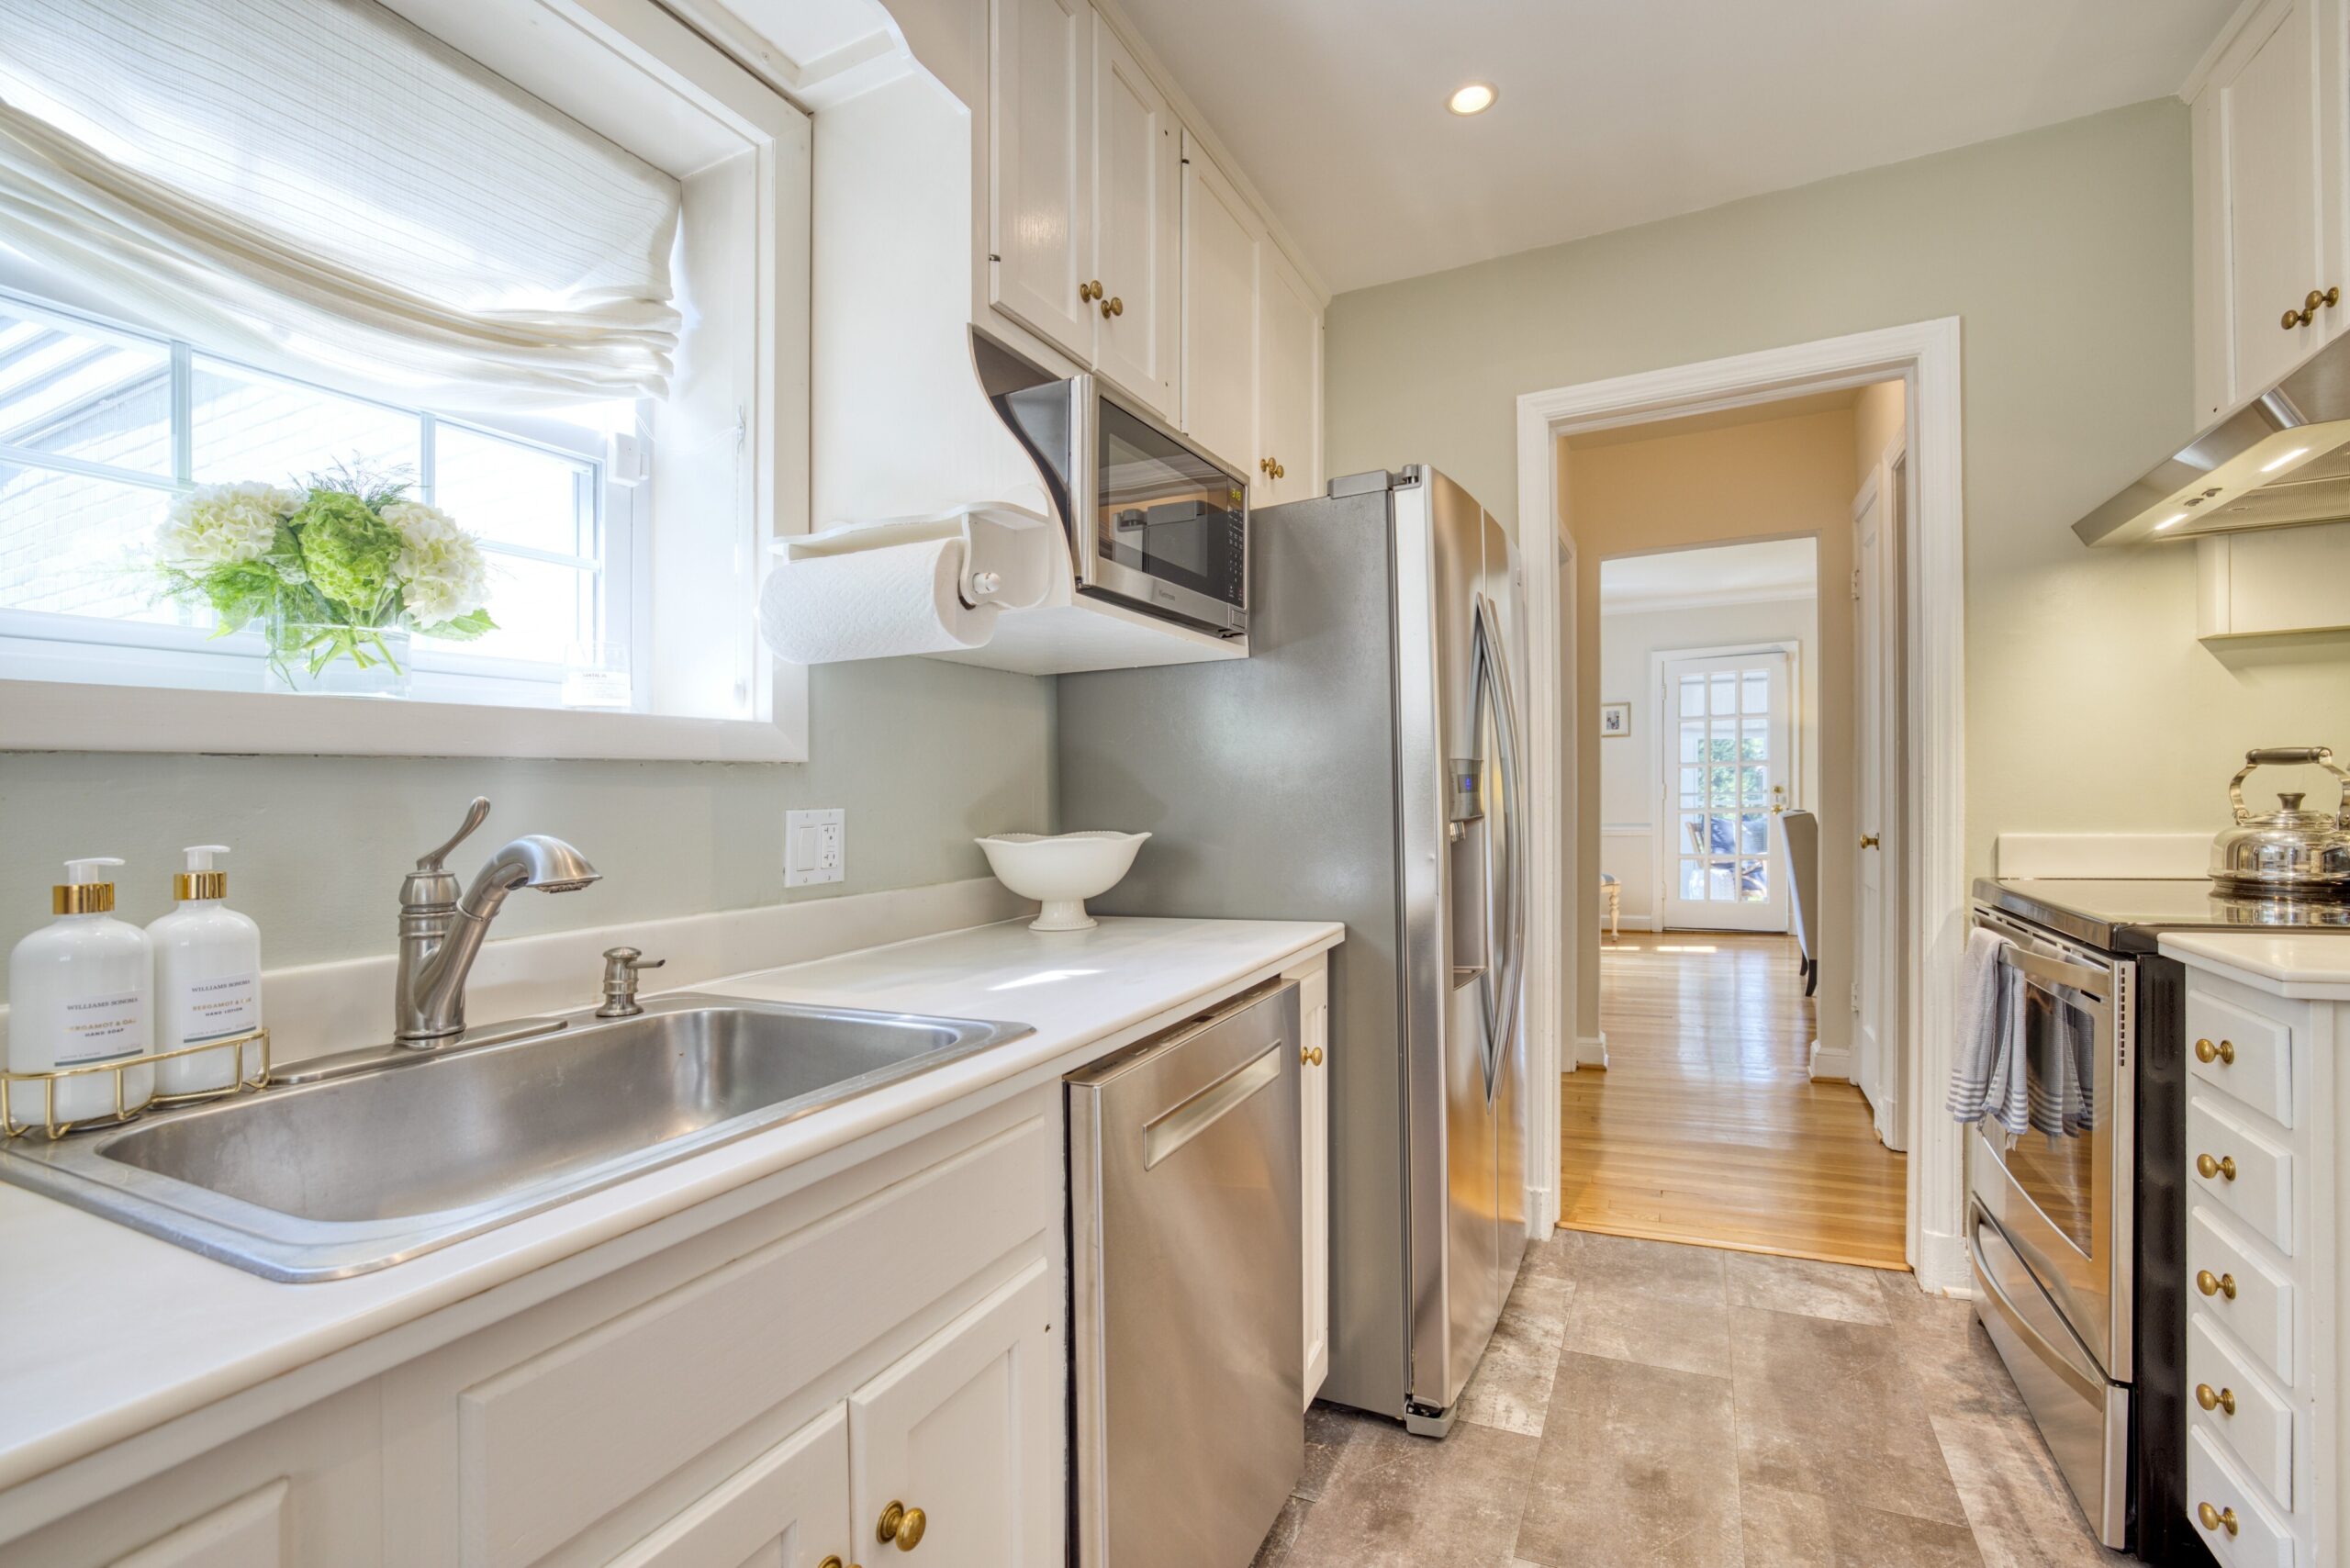 Interior professional photo of kitchen of 1946 Cape Cod home in Alexandria, VA with minimal staging